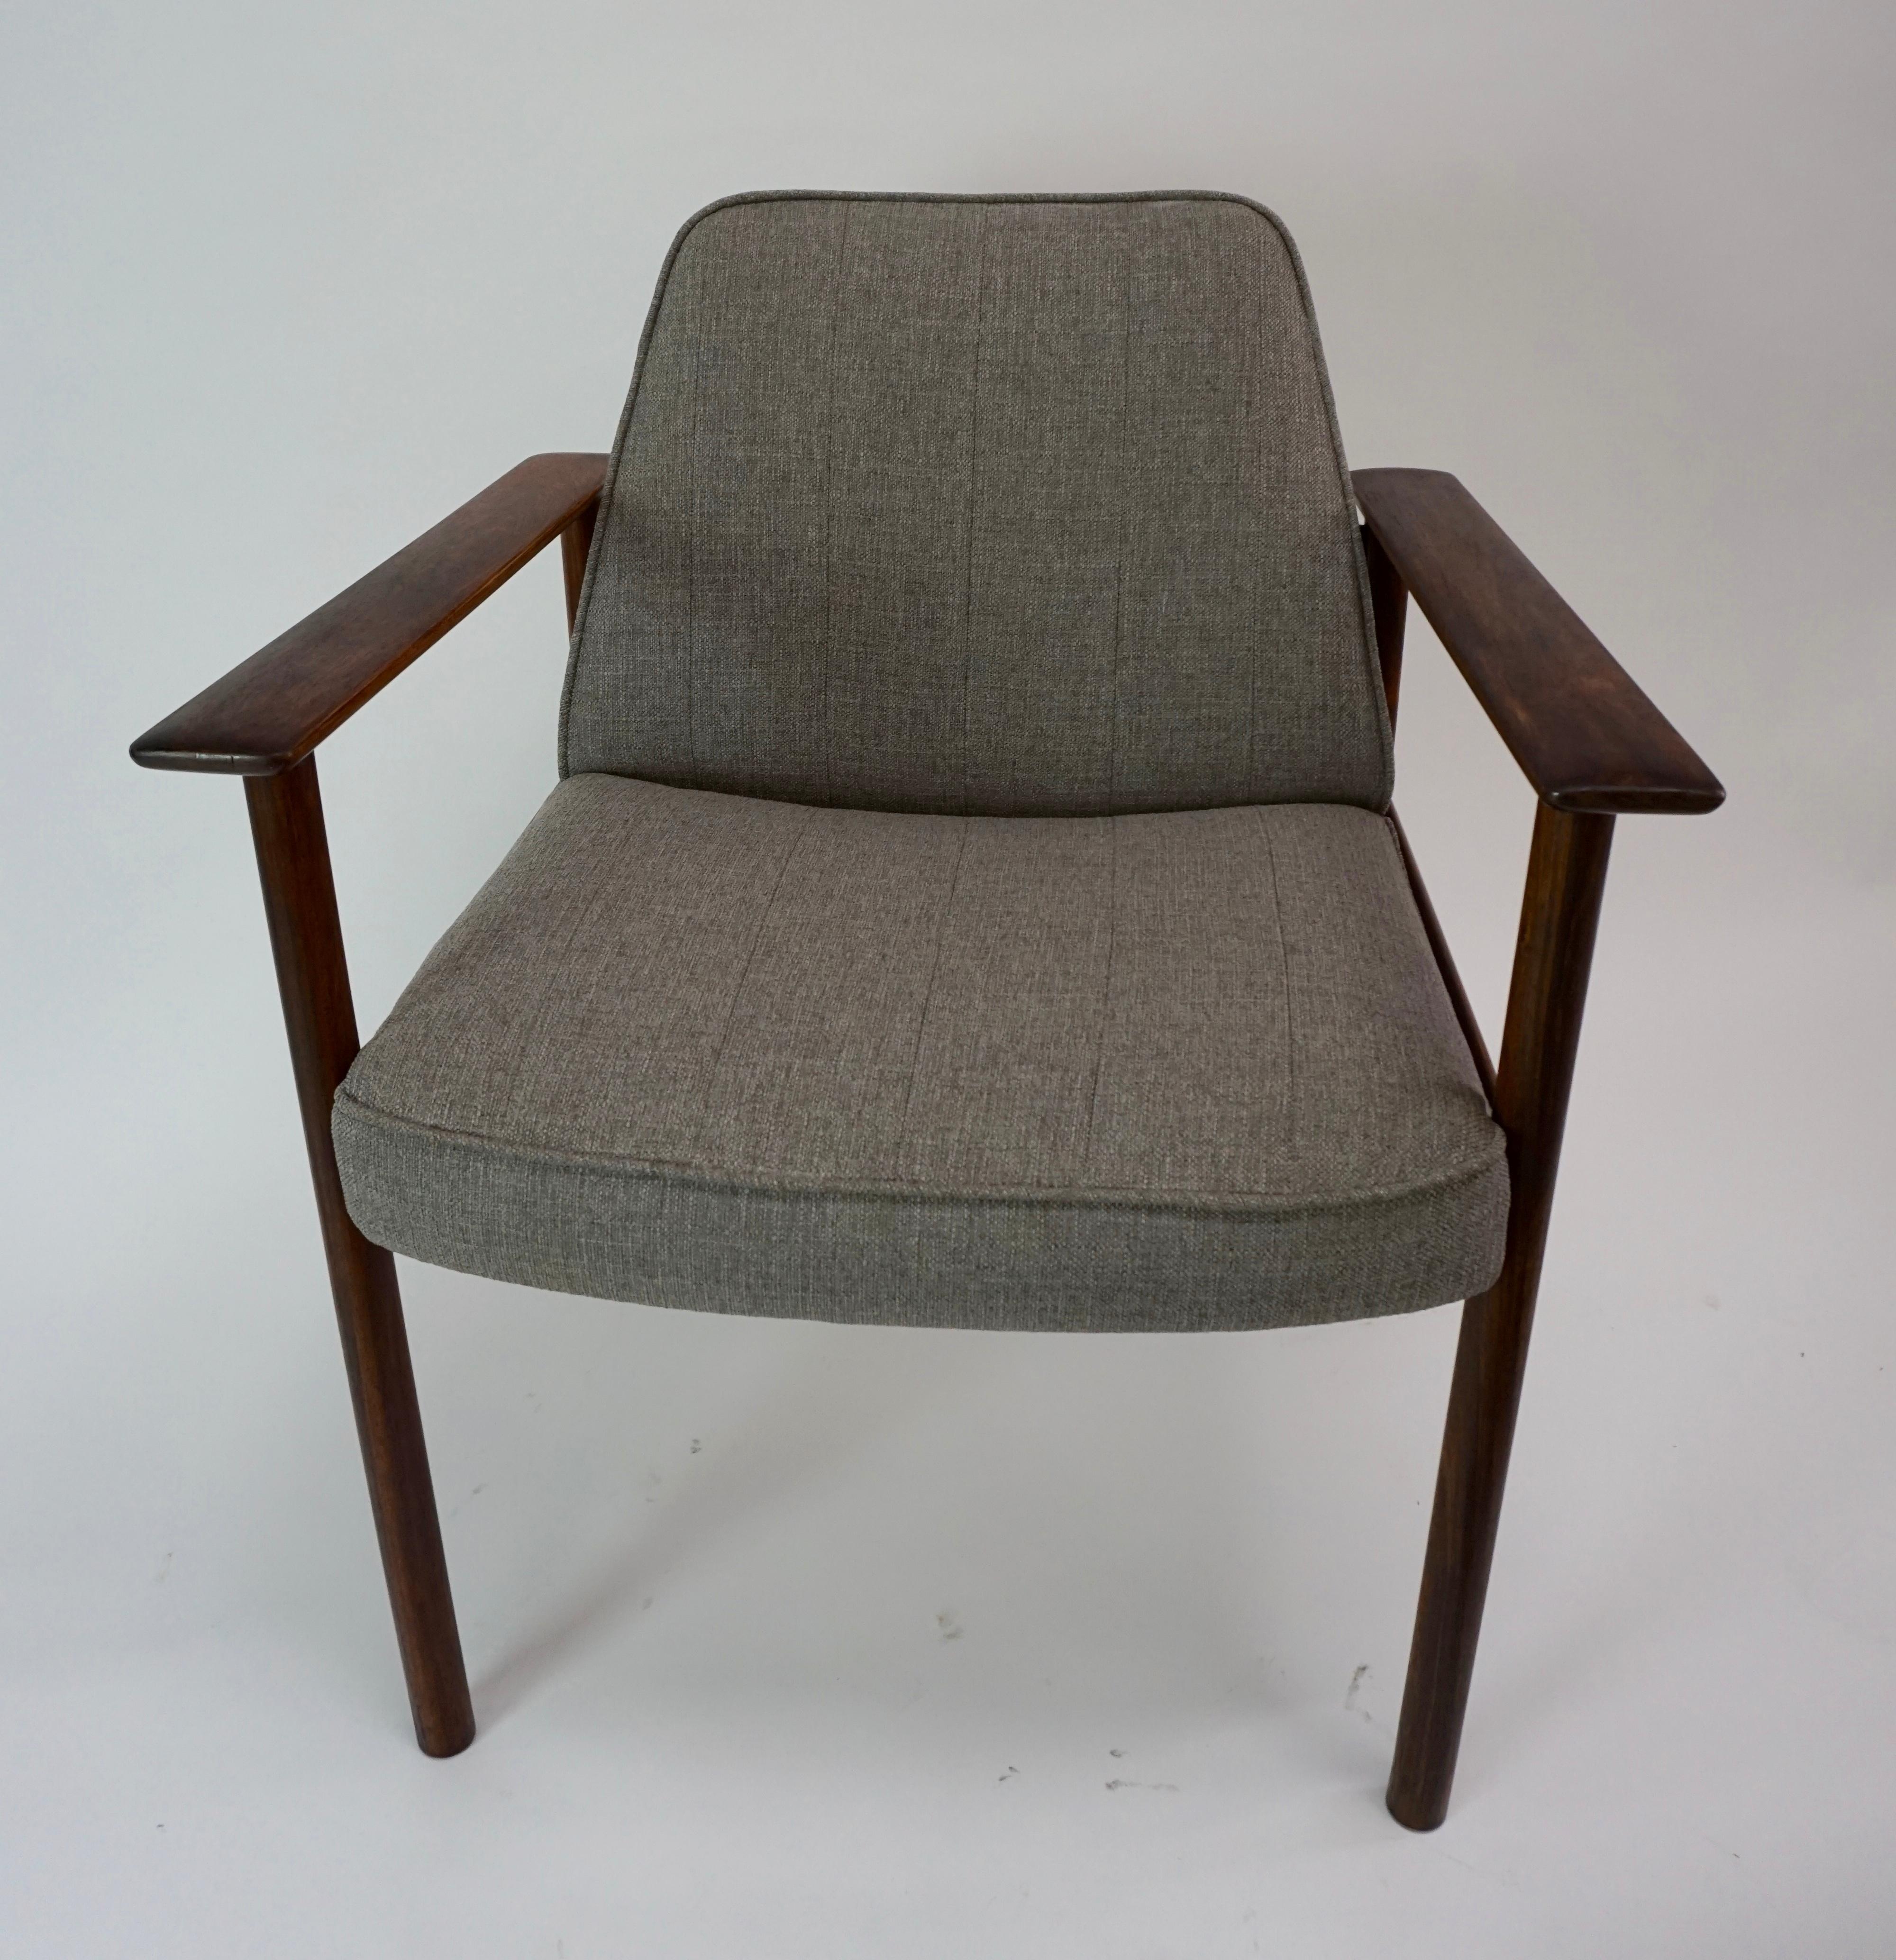 Pair of solid rosewood chairs have new foam and strapping, along with fabric. Textured fabric is a warm grey color. There is a subtle stitching detail in upholstery, as noted in second photo. This set is labelled. Made in Norway.